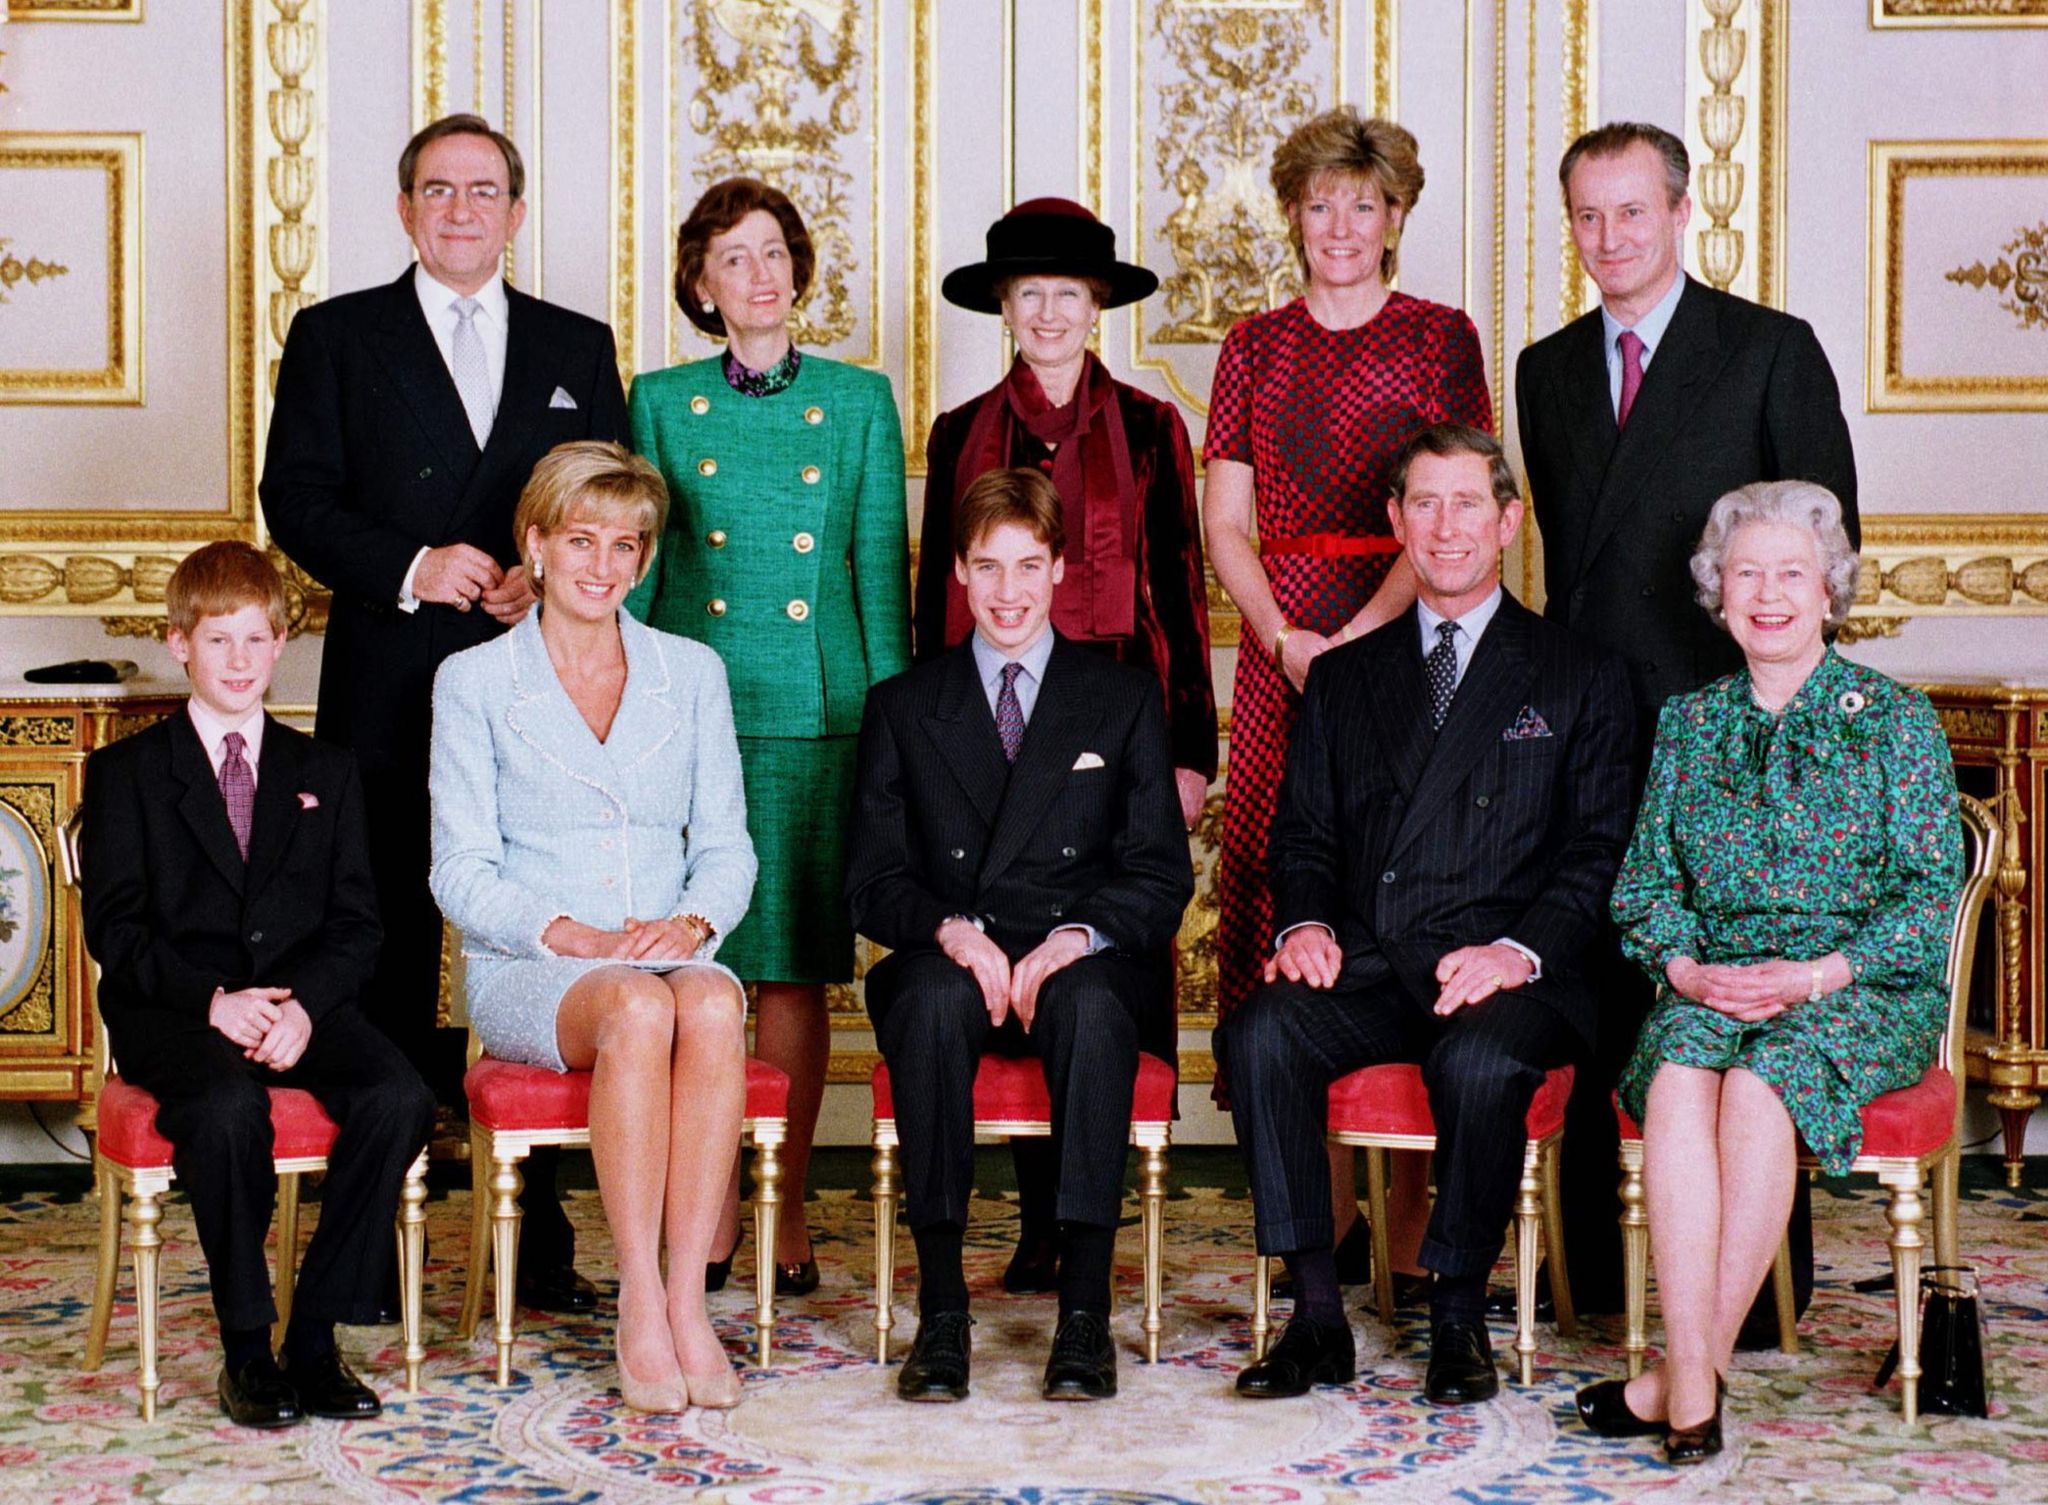 Official Portrait Of The Royal Family On The Day Of Prince William's Confirmation. Front Left To Right - Prince William, Princess Diana, Prince William, Prince Charles And The Queen. Back Left To Right - King Constantine, Lady Susan Hussey, Princess Alexandra, Duchess Of Westminster And Lord Romsey